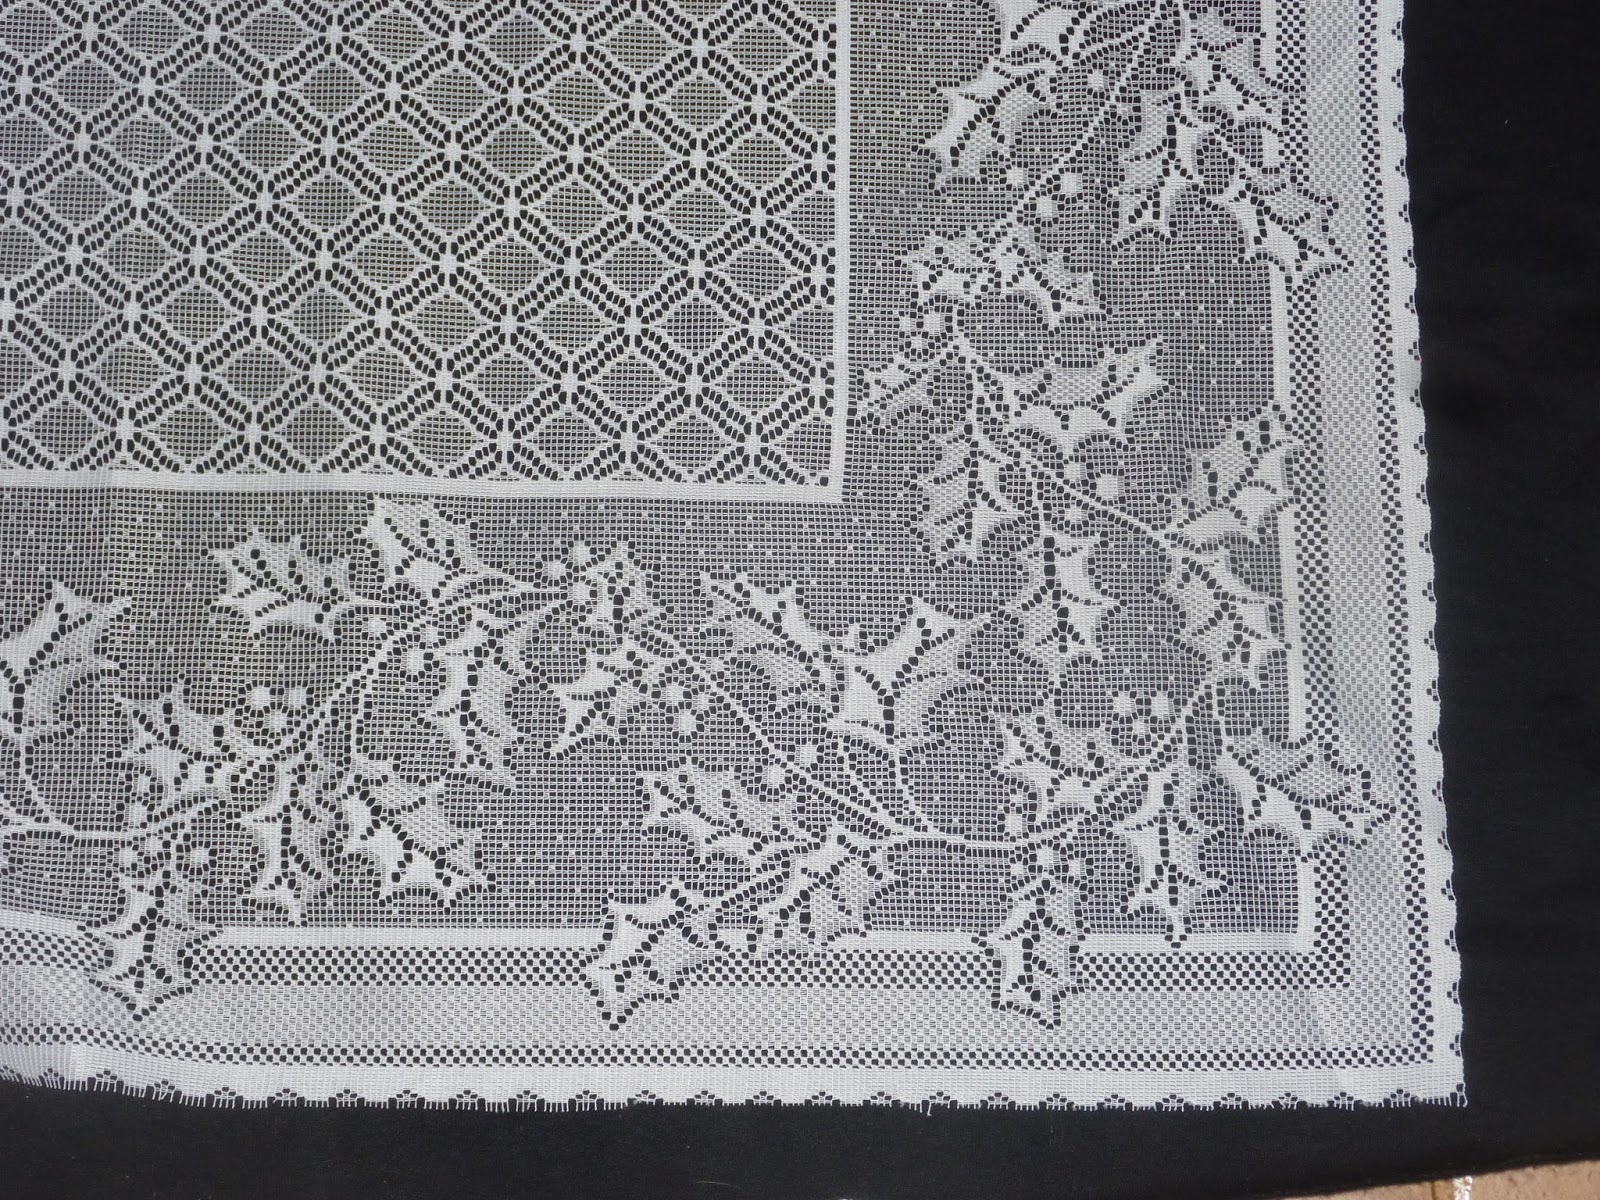 http://www.ebay.com/itm/Tablecloth-Christmas-Winter-Holly-White-90-x-70-Heritage-Lace-NWOT-Made-in-USA-/151290599662